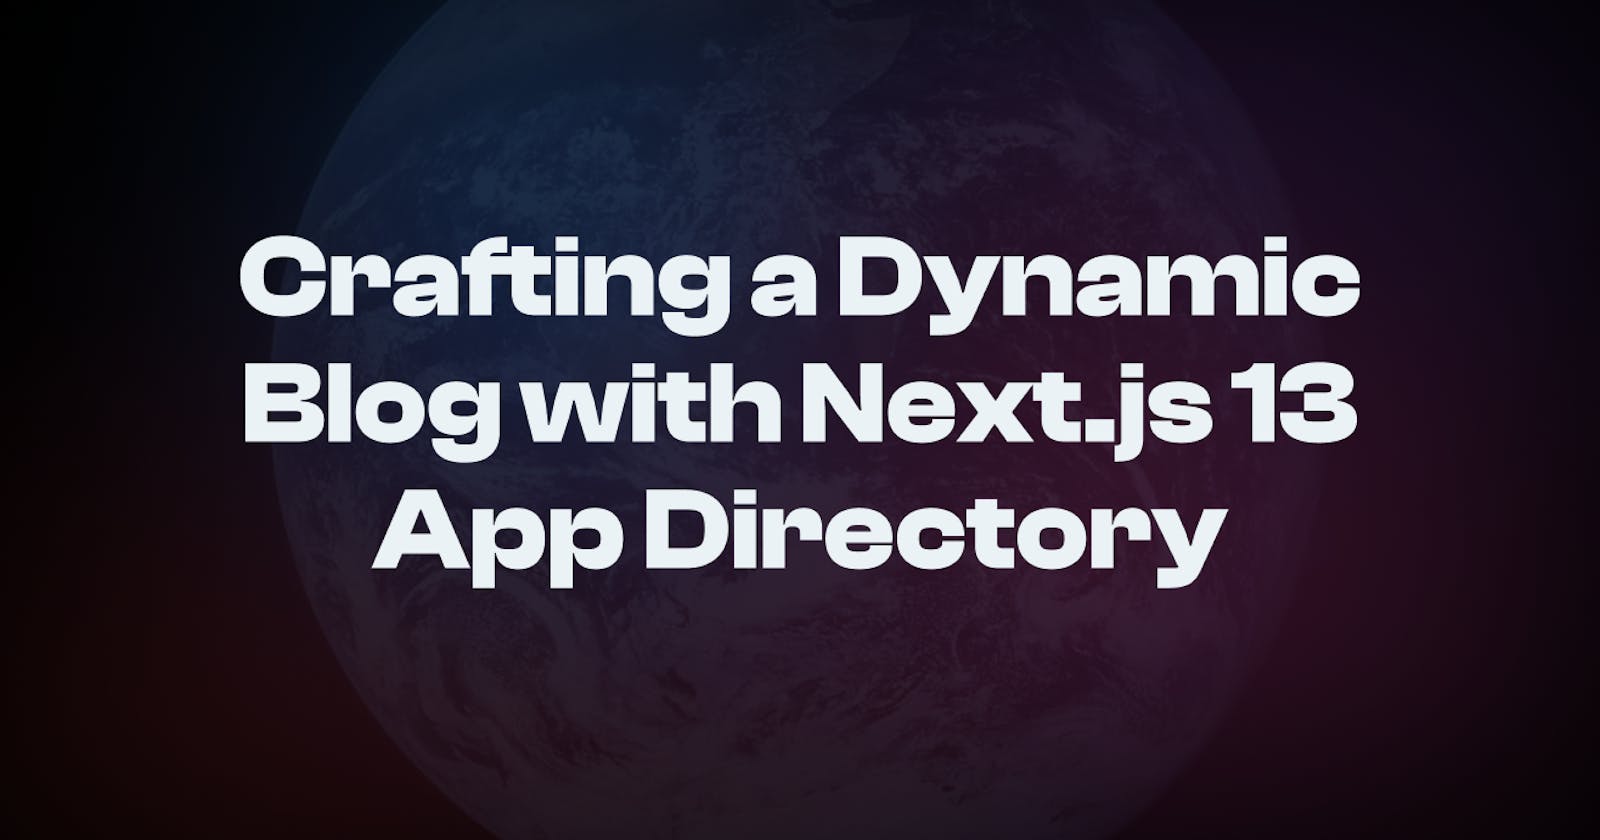 Crafting a Dynamic Blog with Next.js 13 App Directory